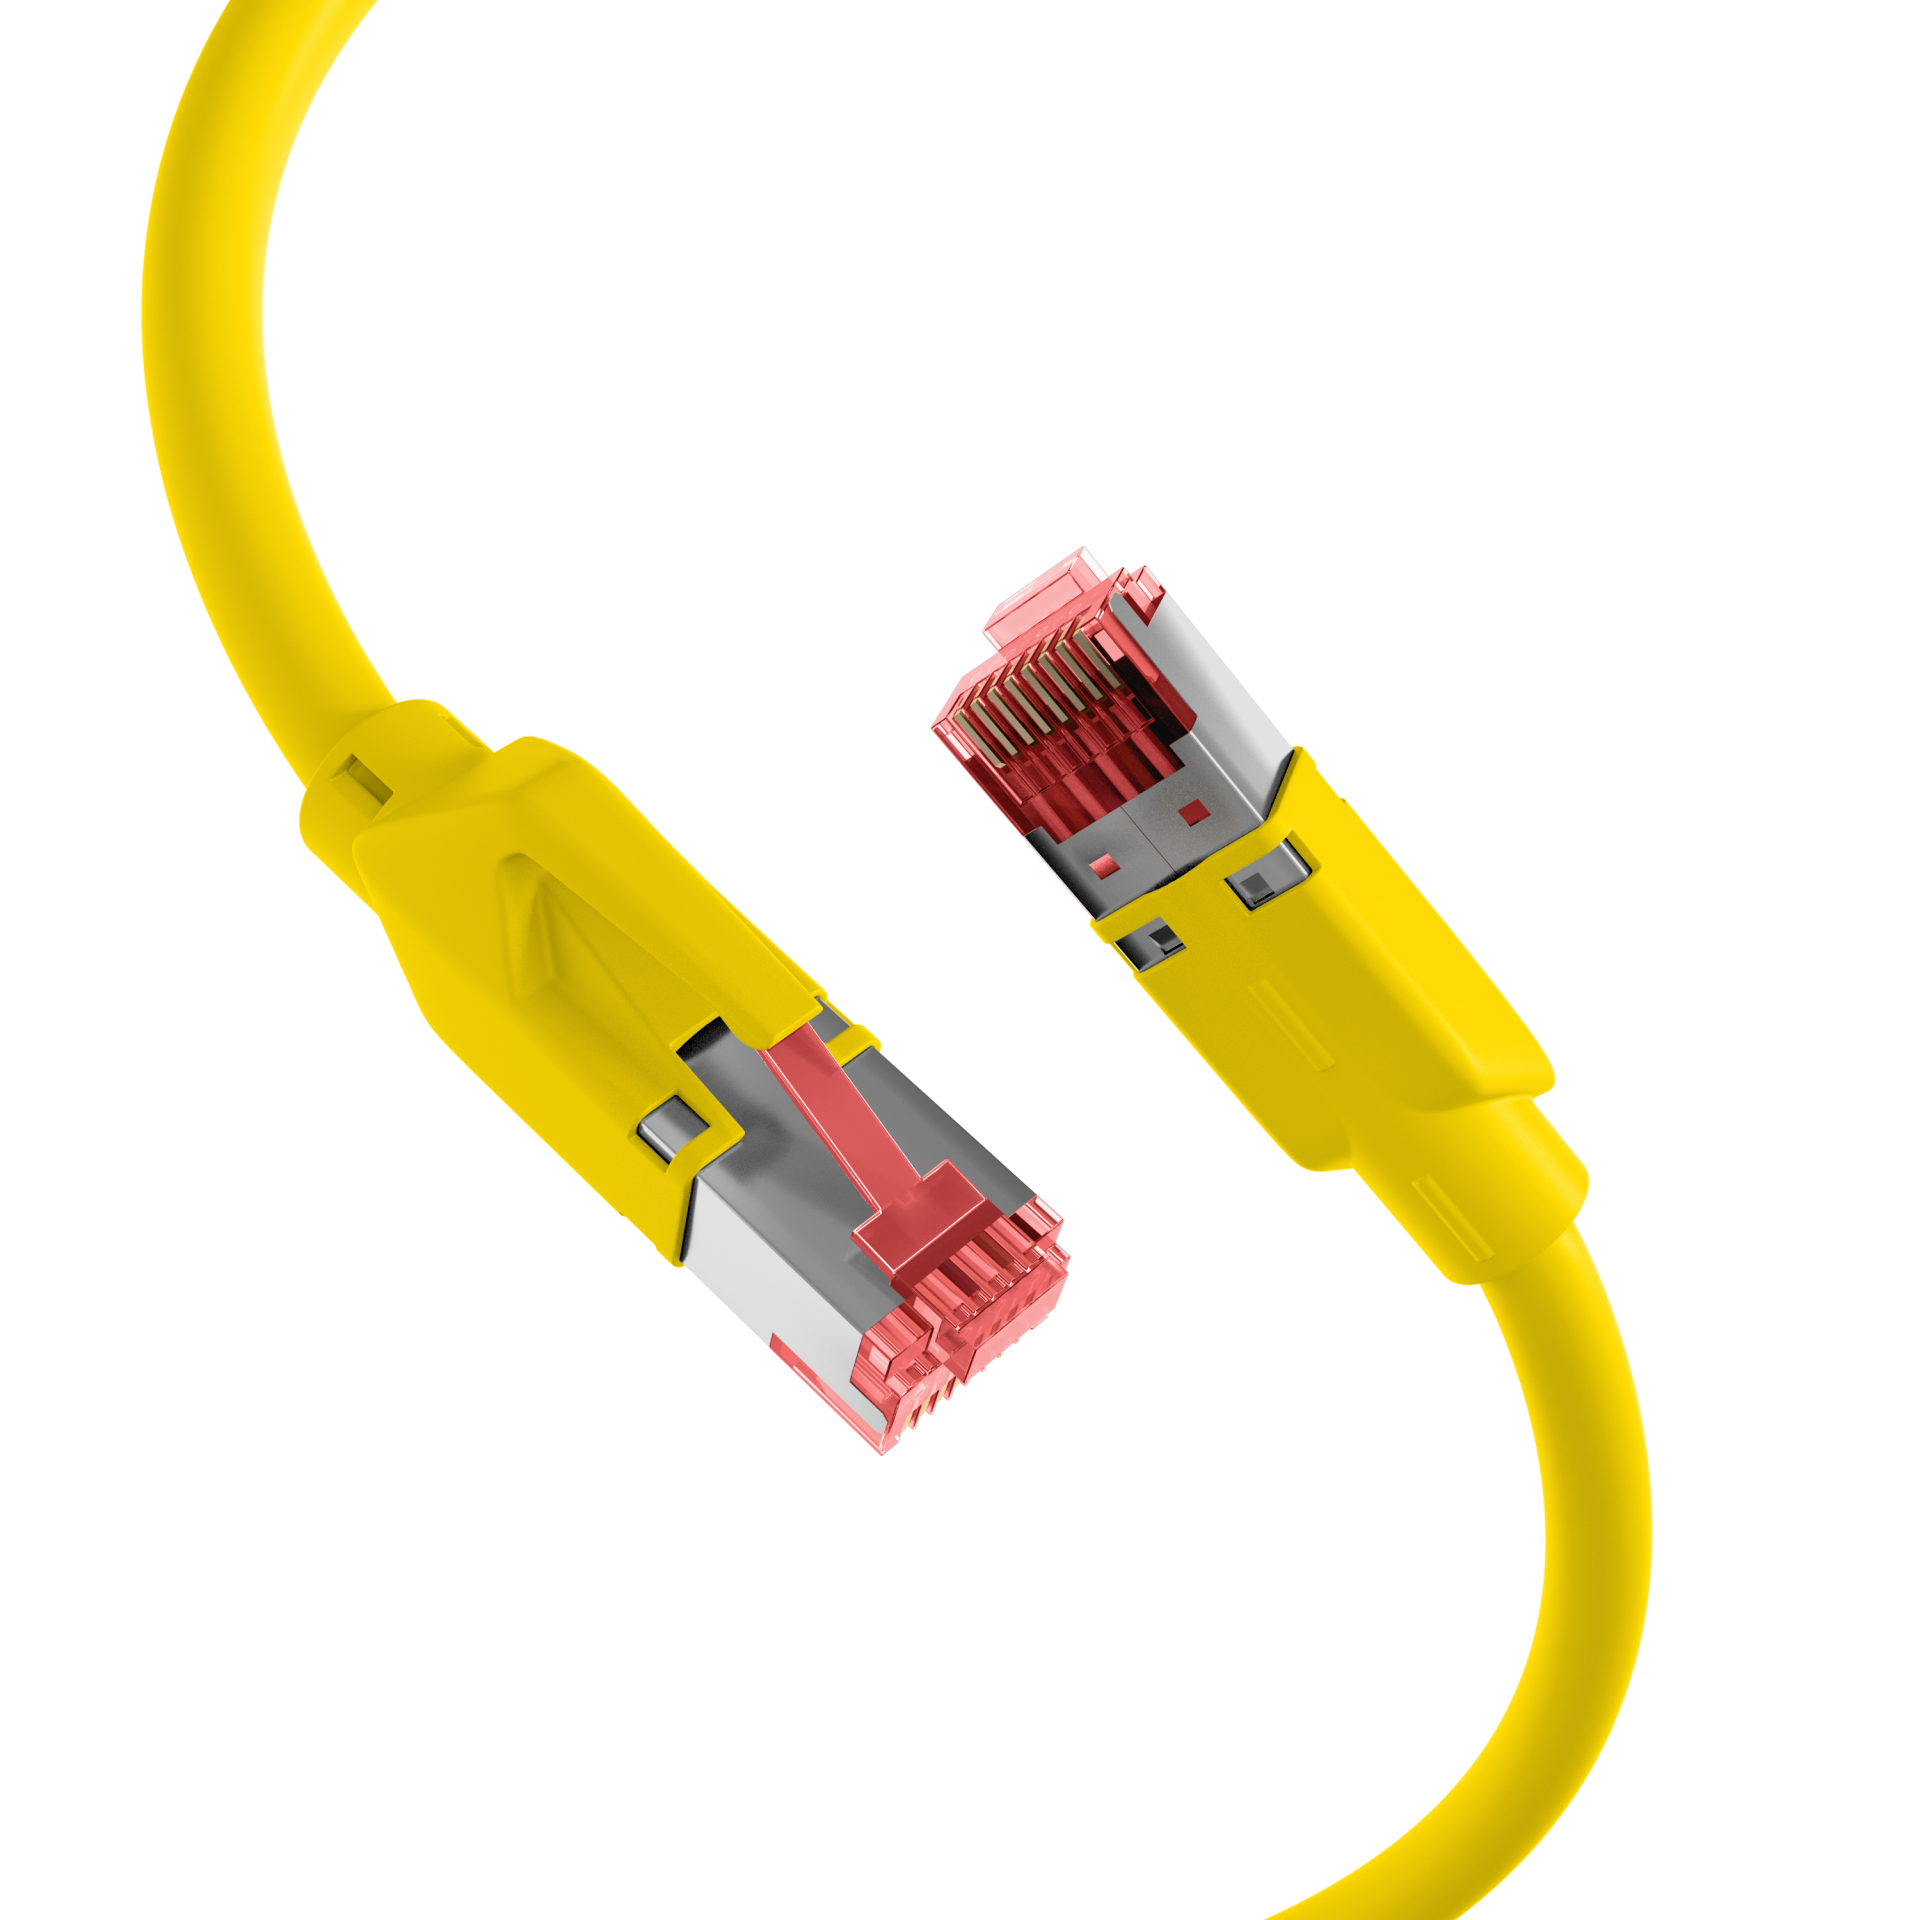 RJ45 Patch Cord Cat.5e SF/UTP PURTM21 for drag chains yellow 3m